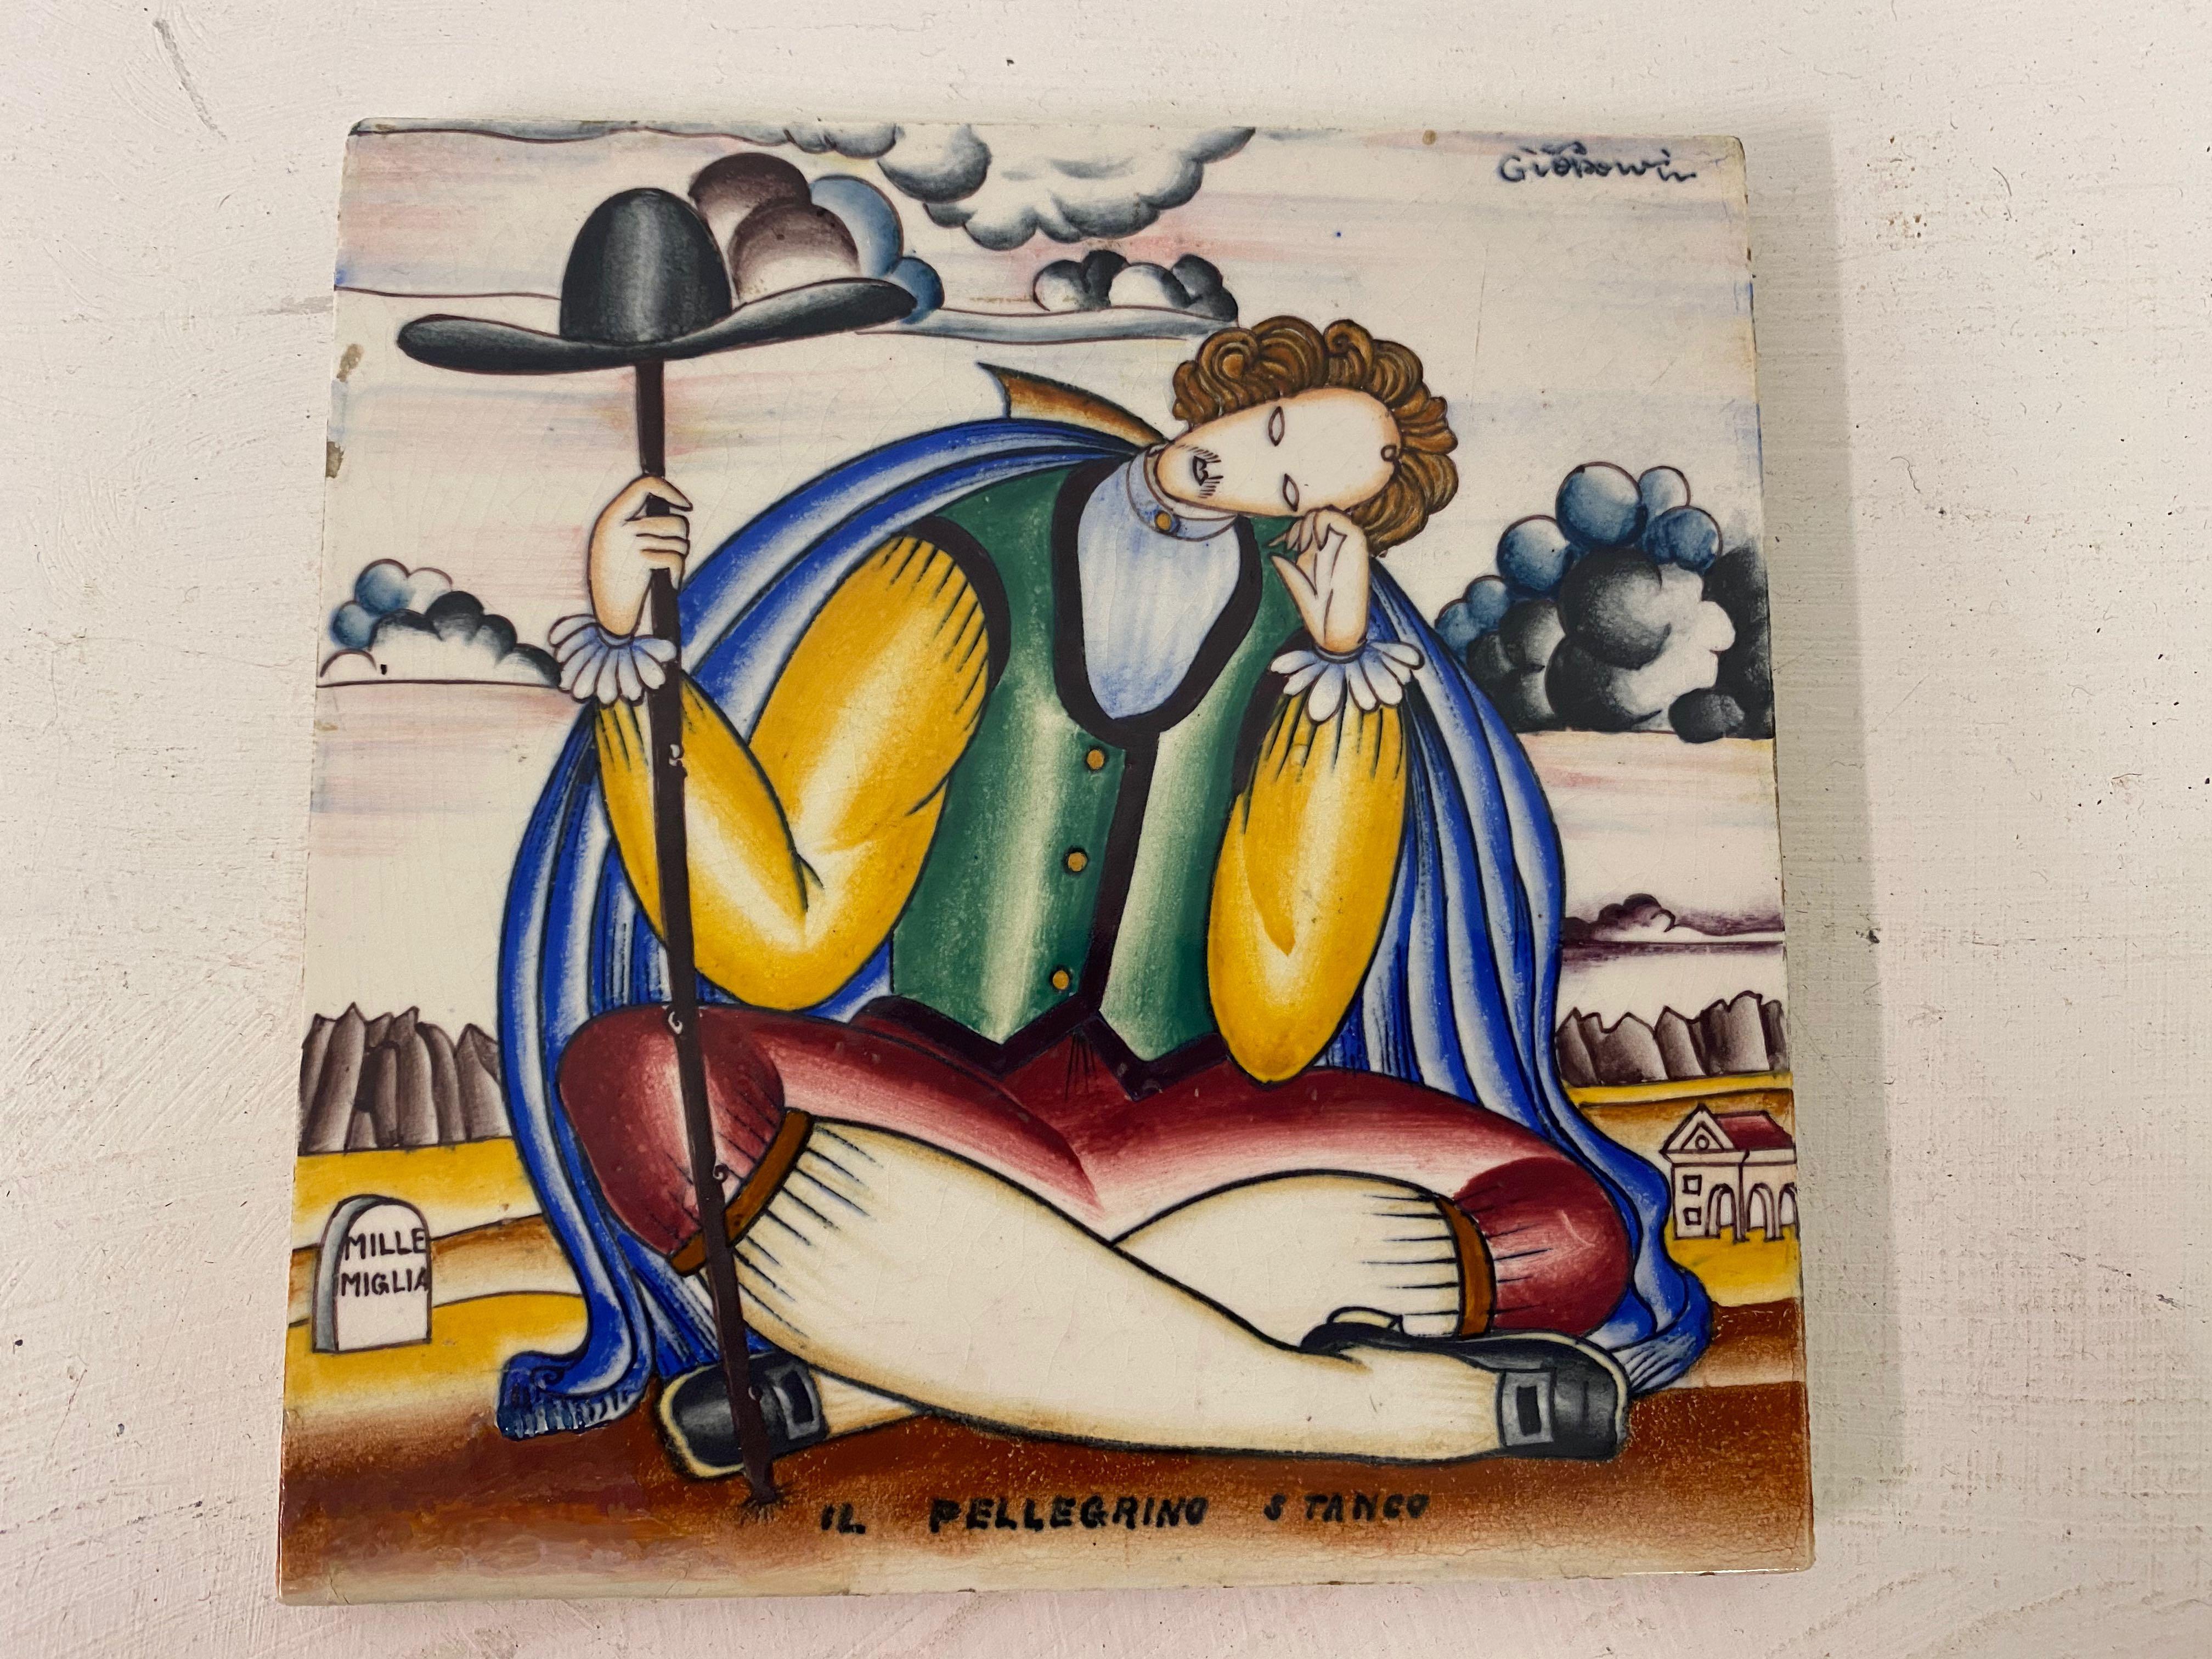 Ceramic tile

By Gio Ponti

For Richard Ginori

Signed on the front

Titled 